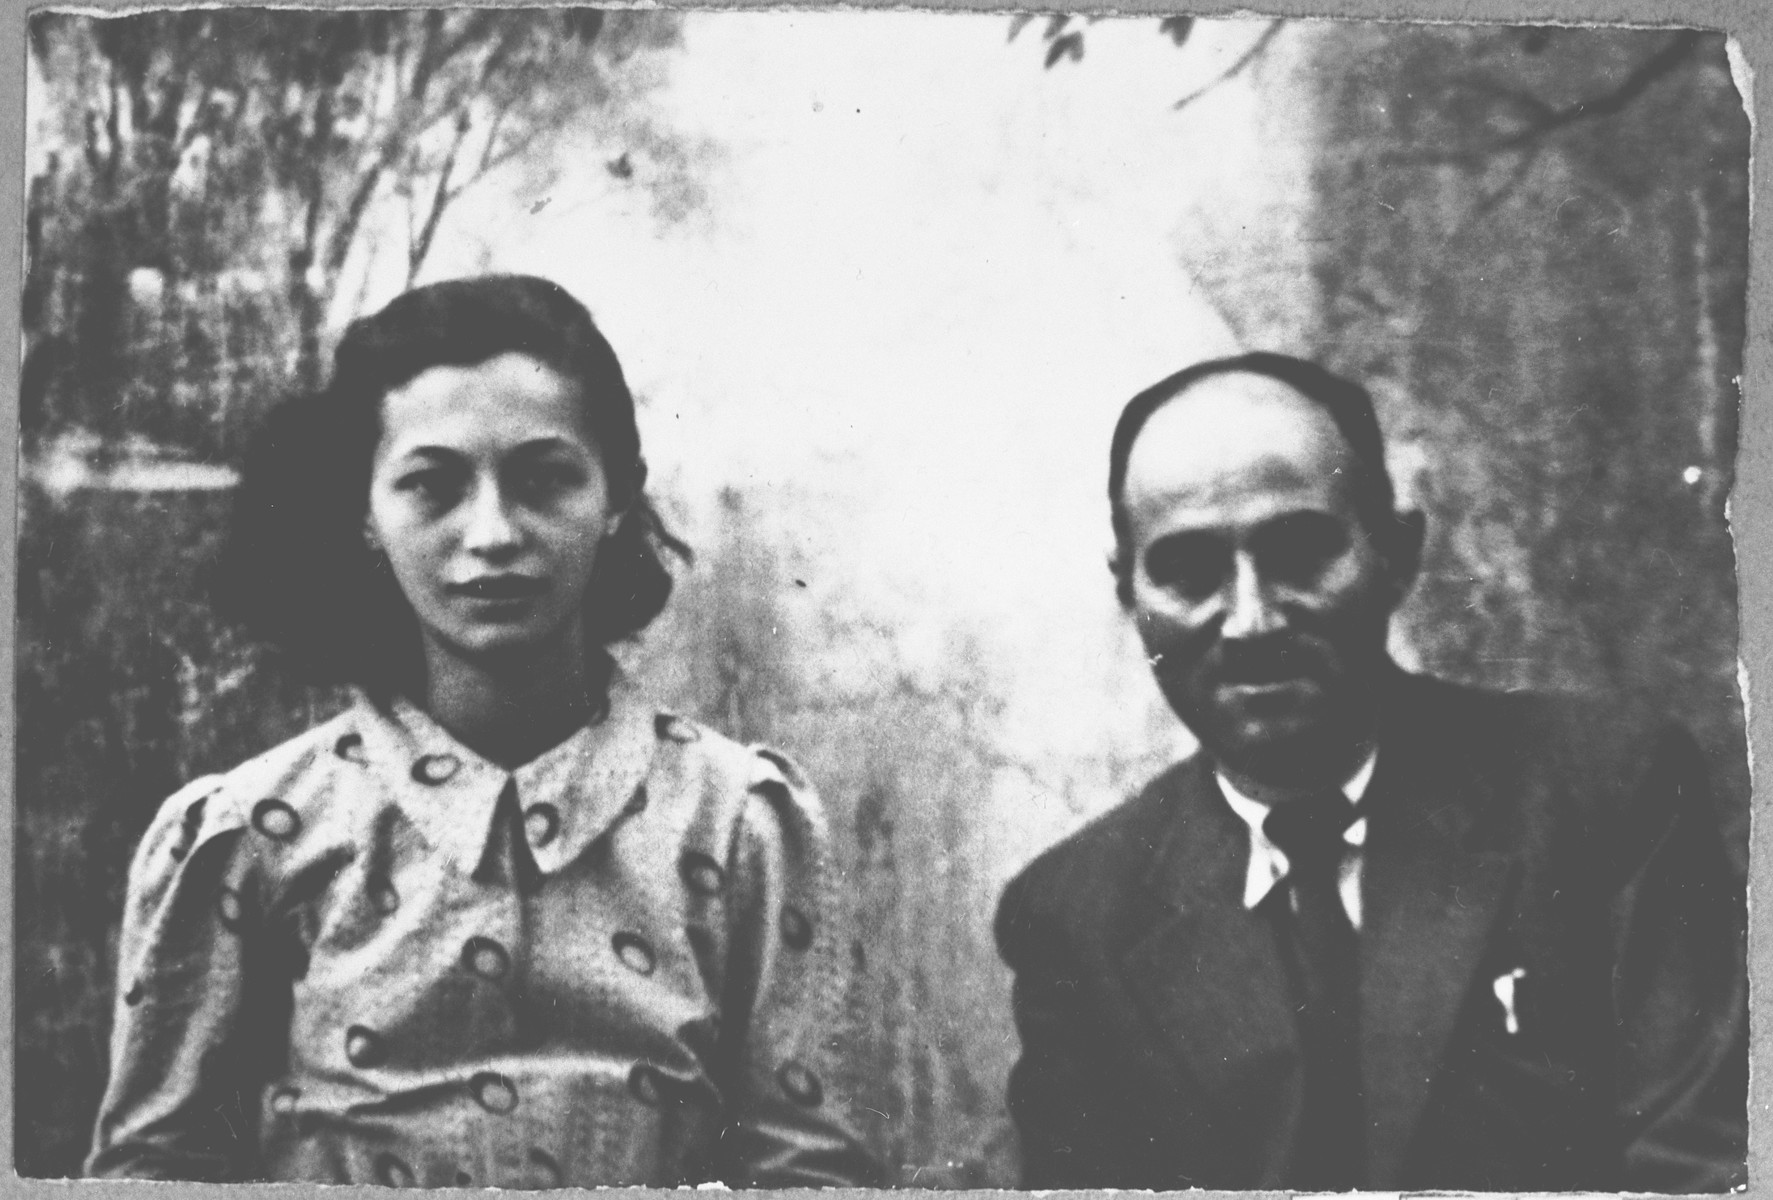 Portrait of Avram Kamchi and his daughter, Palomba.  Avram was a manufacturer and Palomba, a student.  They lived at Dalmatinska 57 in Bitola.